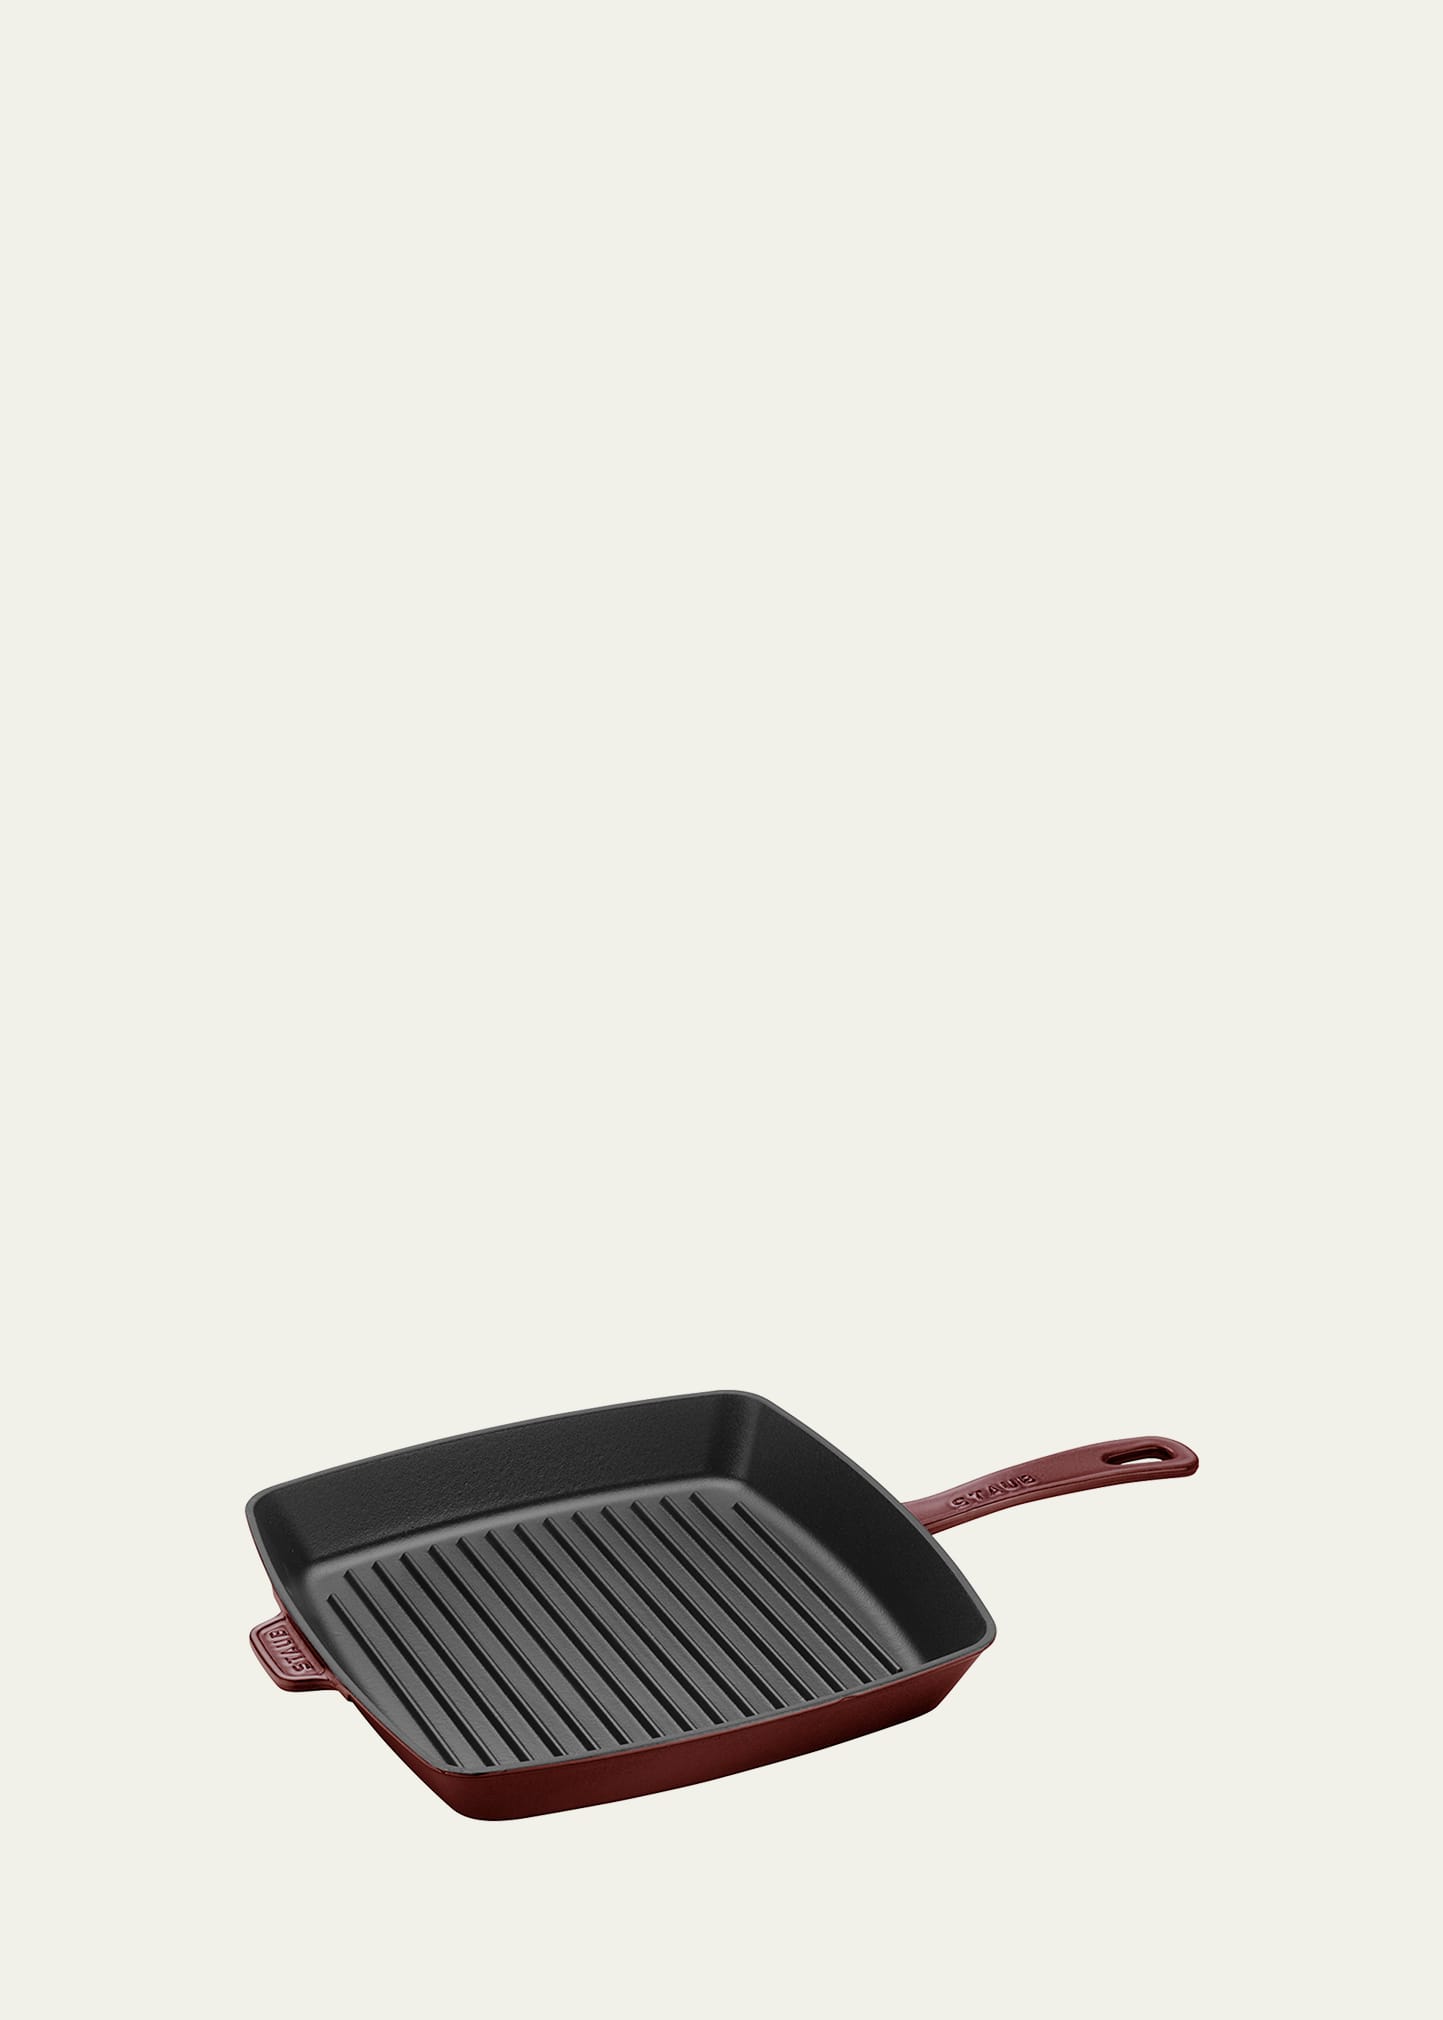 Staub Cast Iron 12-inch Square Grill Pan In Burgundy